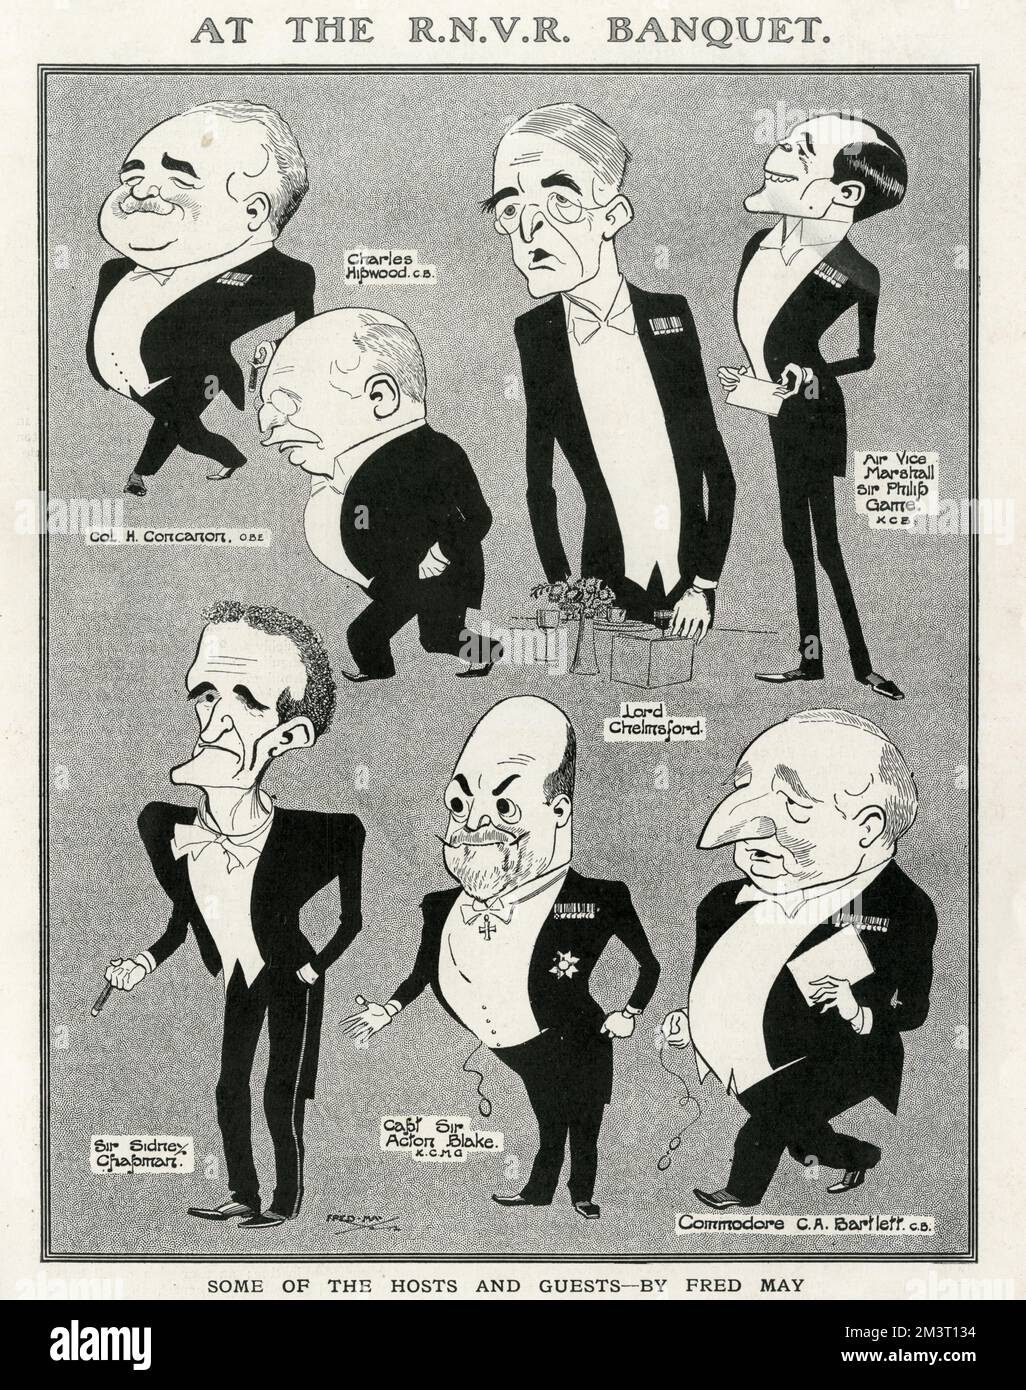 Personalities at the Royal Naval Volunteer Reserve banquet caricatured by Fred May. Pictured are C. I. H. Concannon, Charles Hipwood, Lord Chelmsford, Air Vice Marshal Sir Philip Garrie, Sir Sidney Chapman, Capt. Sir Acton Blake and Comodore C. A. Bartlett. Stock Photo